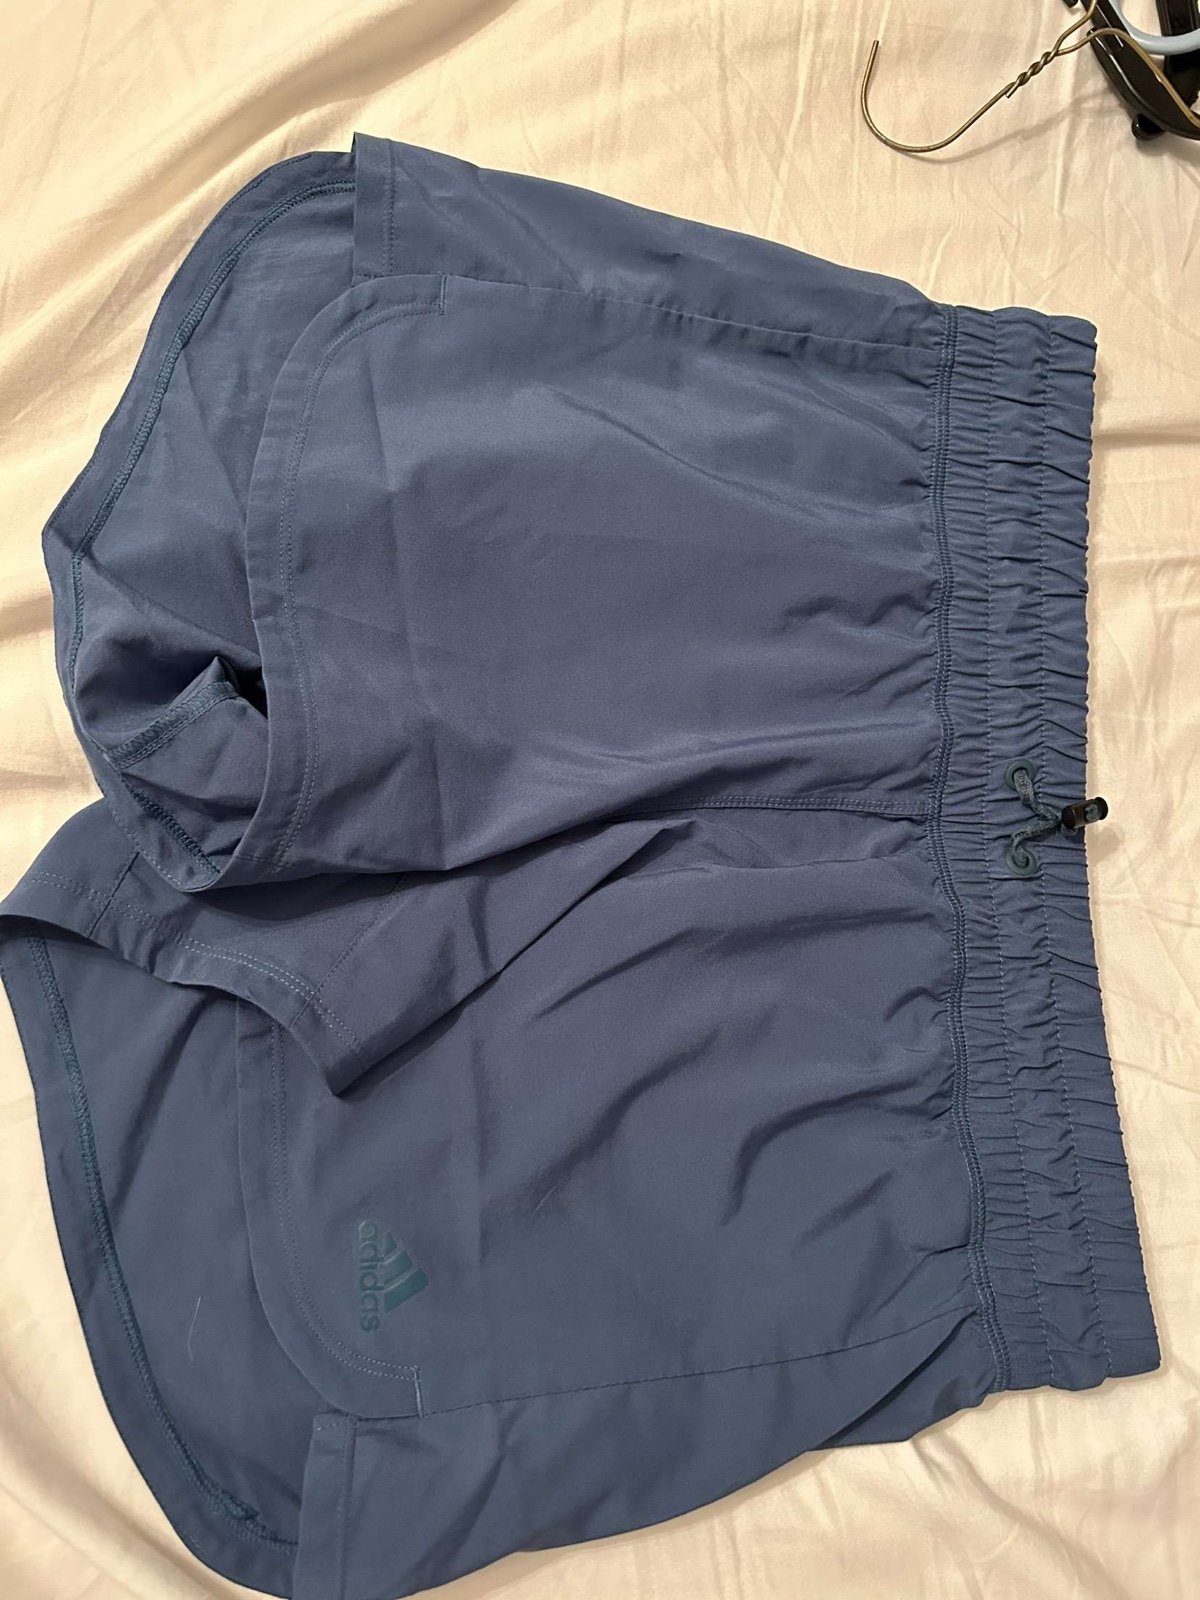 Promotions  Athletic Shorts HuIqwYe1m well sale